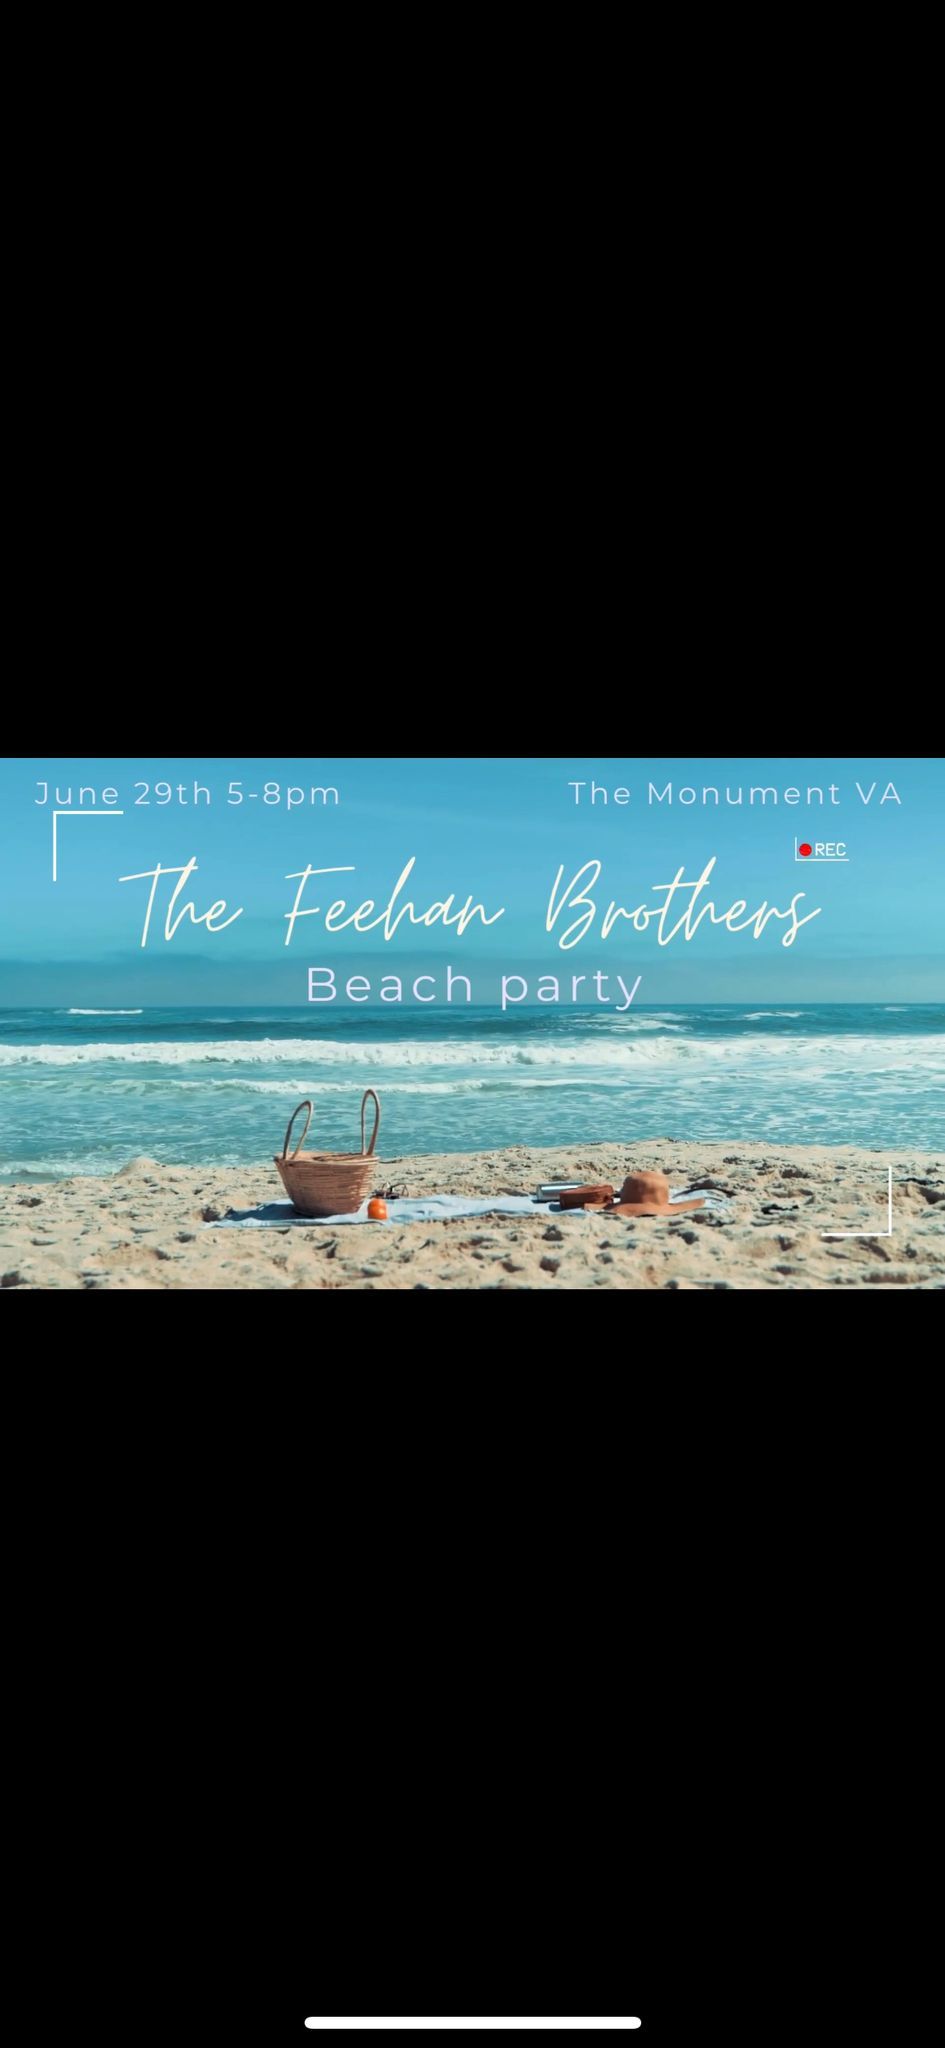 BEACH PARTY with the Feehan Brothers!